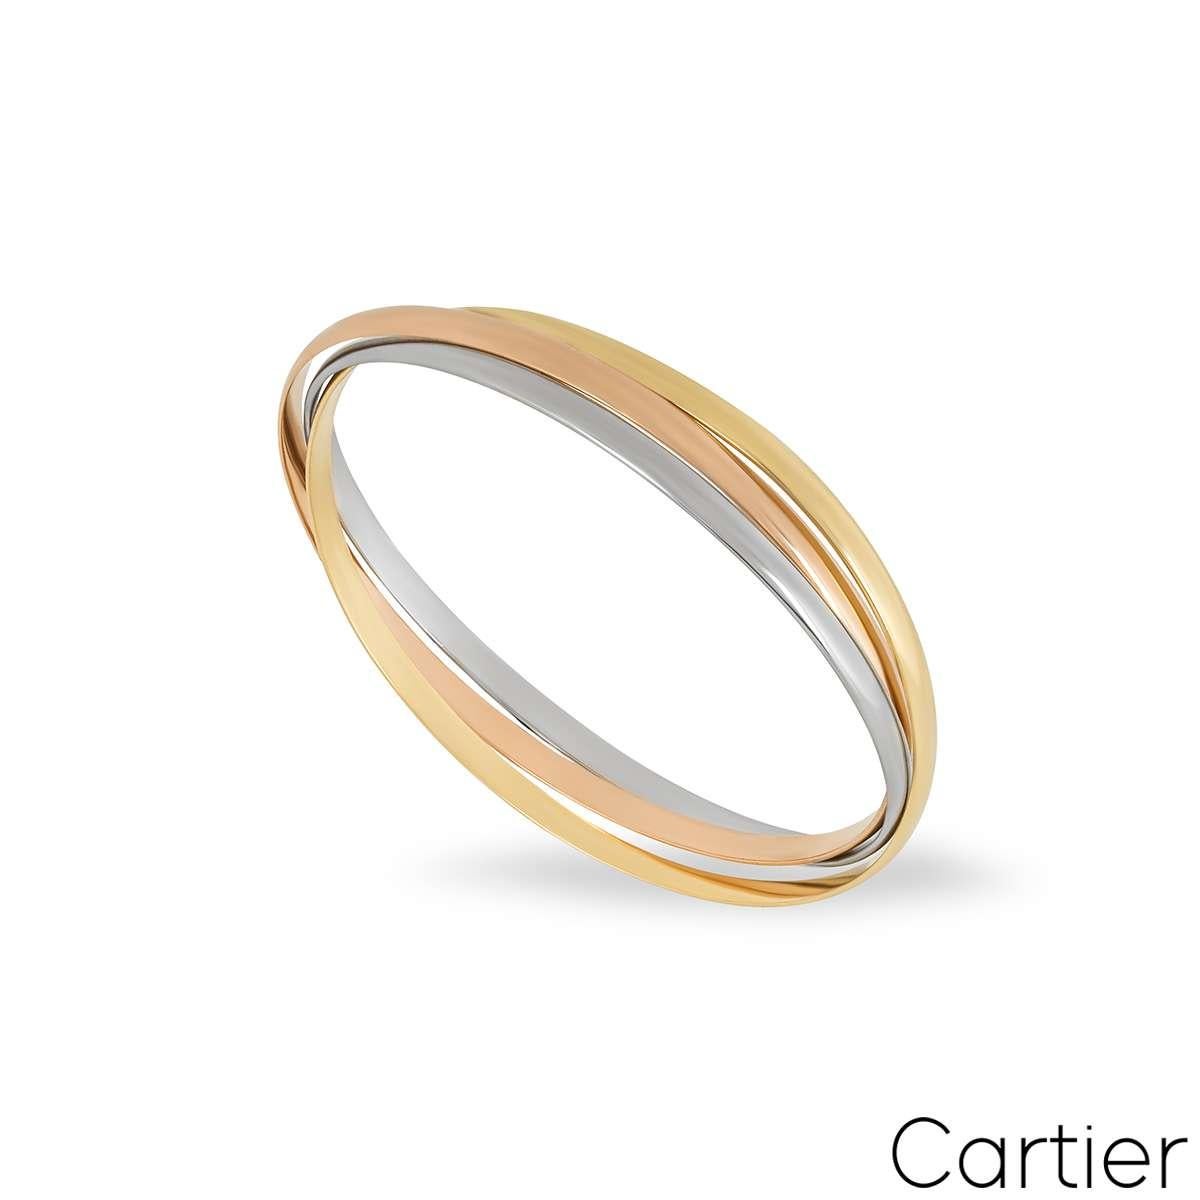 An 18k tri-colour gold Cartier SM bracelet from the Trinity de Cartier collection. The bracelet is made up of three intertwined 18k yellow, white and rose gold bands, each measuring 2.8mm in width. This bracelet is a size 17 and has a gross weight